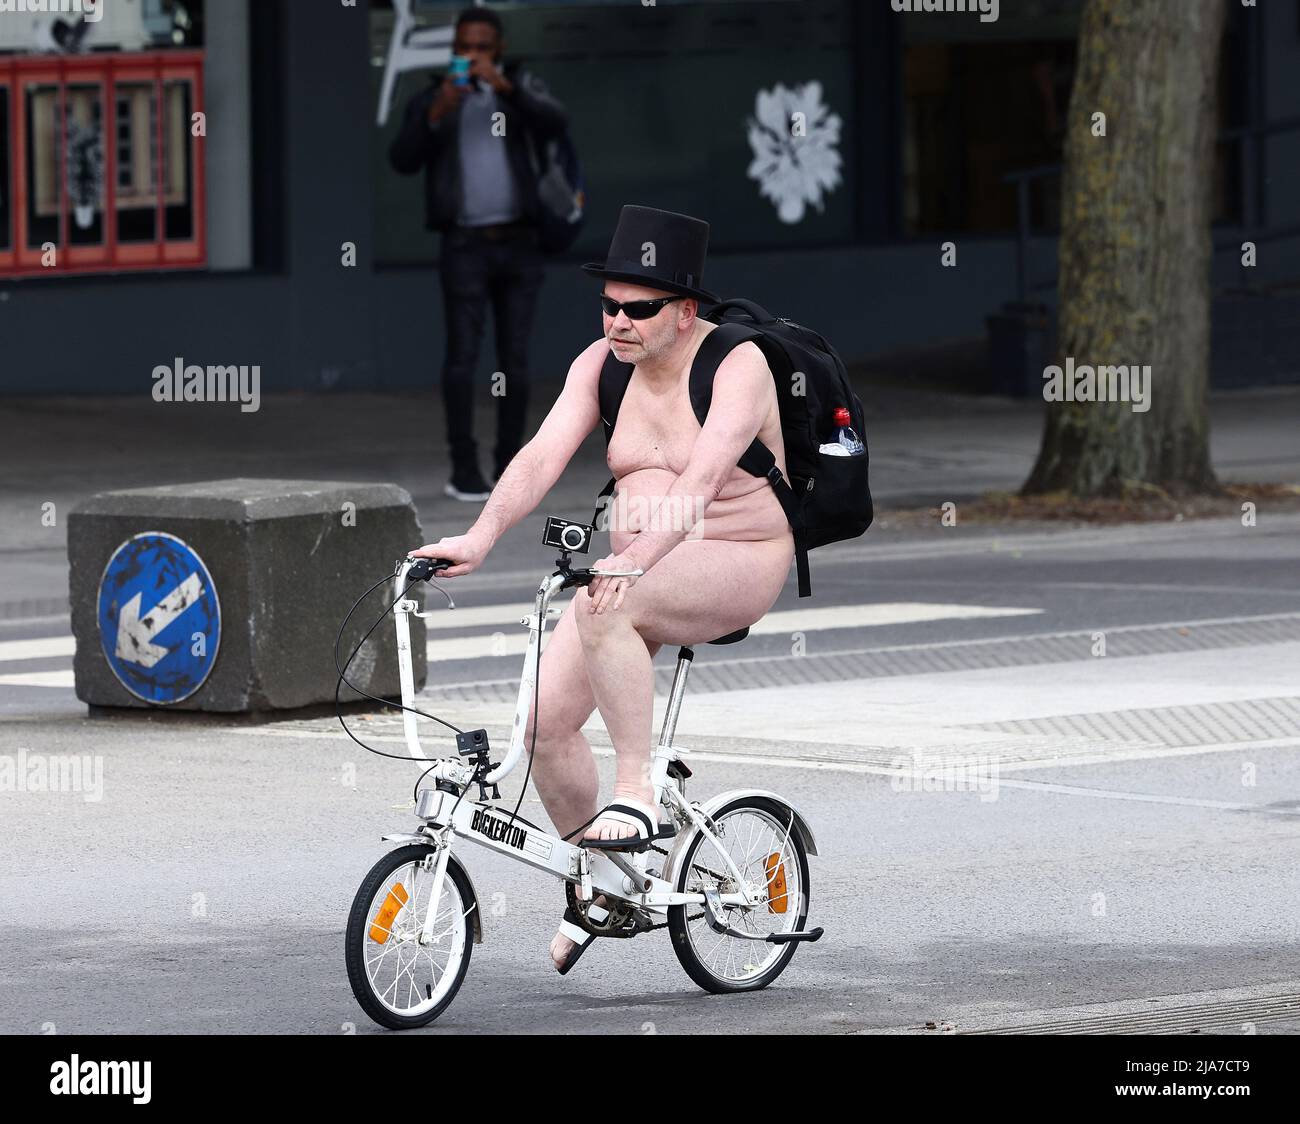 Coventry, Warwickshire, UK. 28th May 2022. Rider attends the Naked Bike Ride eveA nt. The annual demonstration draws attention to the vulnerability of cyclists on the road and oil & gas dependency. Credit Darren Staples/Alamy Live News. Stock Photo